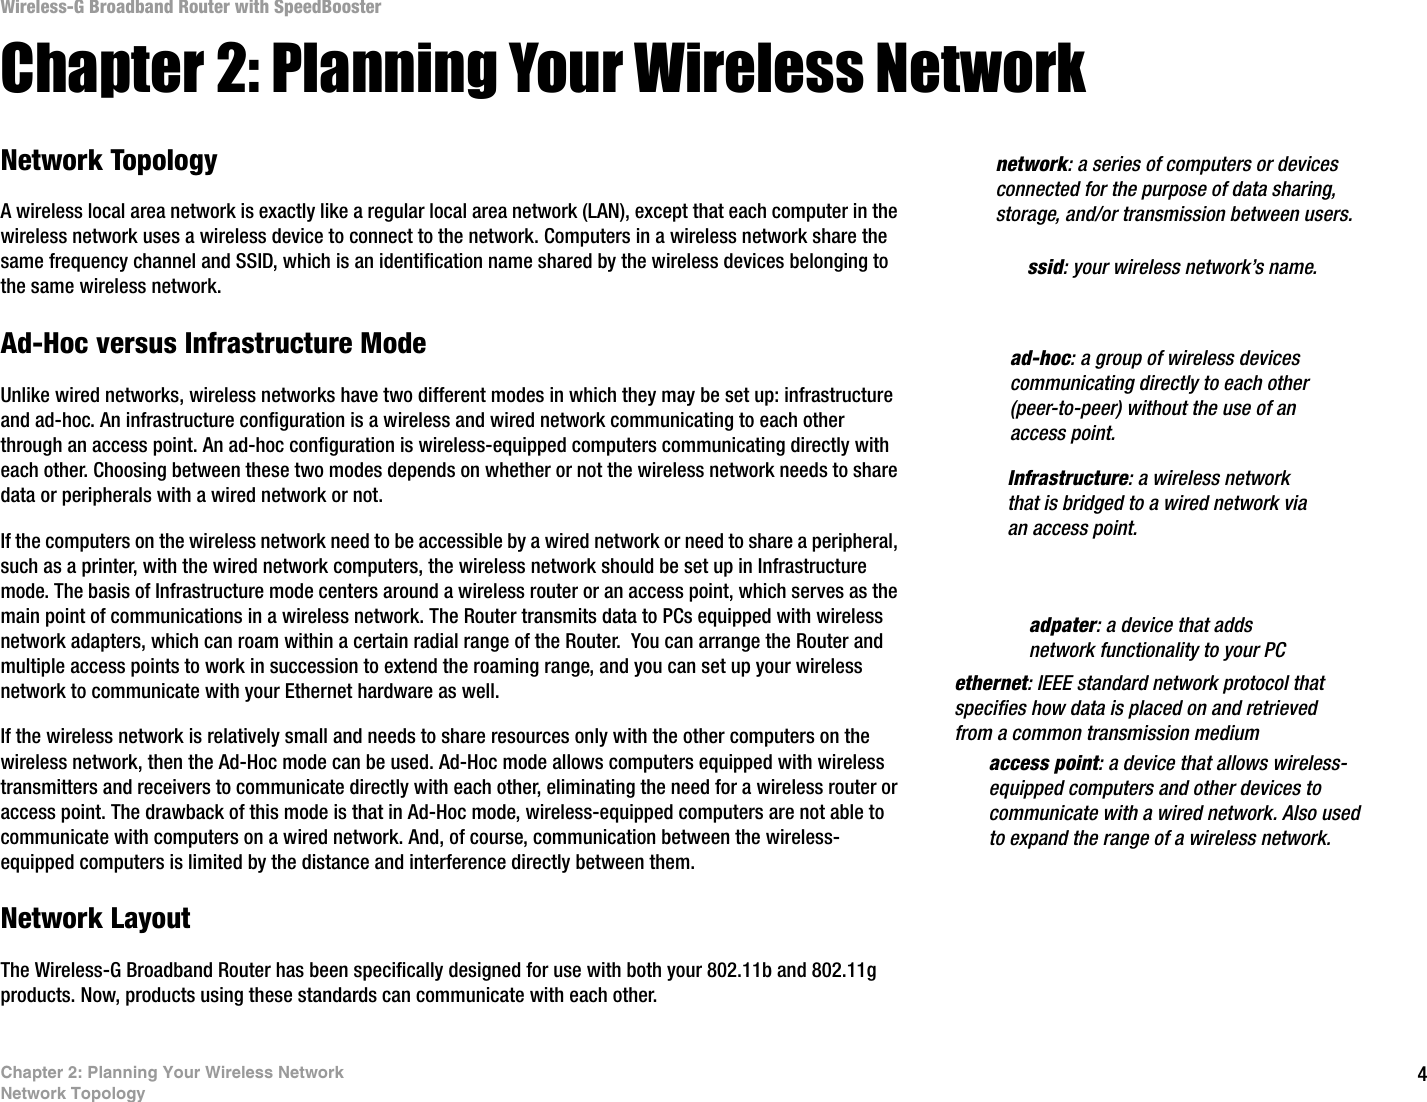 4Chapter 2: Planning Your Wireless NetworkNetwork TopologyWireless-G Broadband Router with SpeedBoosterChapter 2: Planning Your Wireless NetworkNetwork TopologyA wireless local area network is exactly like a regular local area network (LAN), except that each computer in the wireless network uses a wireless device to connect to the network. Computers in a wireless network share the same frequency channel and SSID, which is an identification name shared by the wireless devices belonging to the same wireless network.Ad-Hoc versus Infrastructure ModeUnlike wired networks, wireless networks have two different modes in which they may be set up: infrastructure and ad-hoc. An infrastructure configuration is a wireless and wired network communicating to each other through an access point. An ad-hoc configuration is wireless-equipped computers communicating directly with each other. Choosing between these two modes depends on whether or not the wireless network needs to share data or peripherals with a wired network or not. If the computers on the wireless network need to be accessible by a wired network or need to share a peripheral, such as a printer, with the wired network computers, the wireless network should be set up in Infrastructure mode. The basis of Infrastructure mode centers around a wireless router or an access point, which serves as the main point of communications in a wireless network. The Router transmits data to PCs equipped with wireless network adapters, which can roam within a certain radial range of the Router.  You can arrange the Router and multiple access points to work in succession to extend the roaming range, and you can set up your wireless network to communicate with your Ethernet hardware as well. If the wireless network is relatively small and needs to share resources only with the other computers on the wireless network, then the Ad-Hoc mode can be used. Ad-Hoc mode allows computers equipped with wireless transmitters and receivers to communicate directly with each other, eliminating the need for a wireless router or access point. The drawback of this mode is that in Ad-Hoc mode, wireless-equipped computers are not able to communicate with computers on a wired network. And, of course, communication between the wireless-equipped computers is limited by the distance and interference directly between them. Network LayoutThe Wireless-G Broadband Router has been specifically designed for use with both your 802.11b and 802.11g products. Now, products using these standards can communicate with each other. Infrastructure: a wireless network that is bridged to a wired network via an access point.ssid: your wireless network’s name.ad-hoc: a group of wireless devices communicating directly to each other (peer-to-peer) without the use of an access point.access point: a device that allows wireless-equipped computers and other devices to communicate with a wired network. Also used to expand the range of a wireless network.adpater: a device that adds network functionality to your PCethernet: IEEE standard network protocol that specifies how data is placed on and retrieved from a common transmission mediumnetwork: a series of computers or devices connected for the purpose of data sharing, storage, and/or transmission between users.